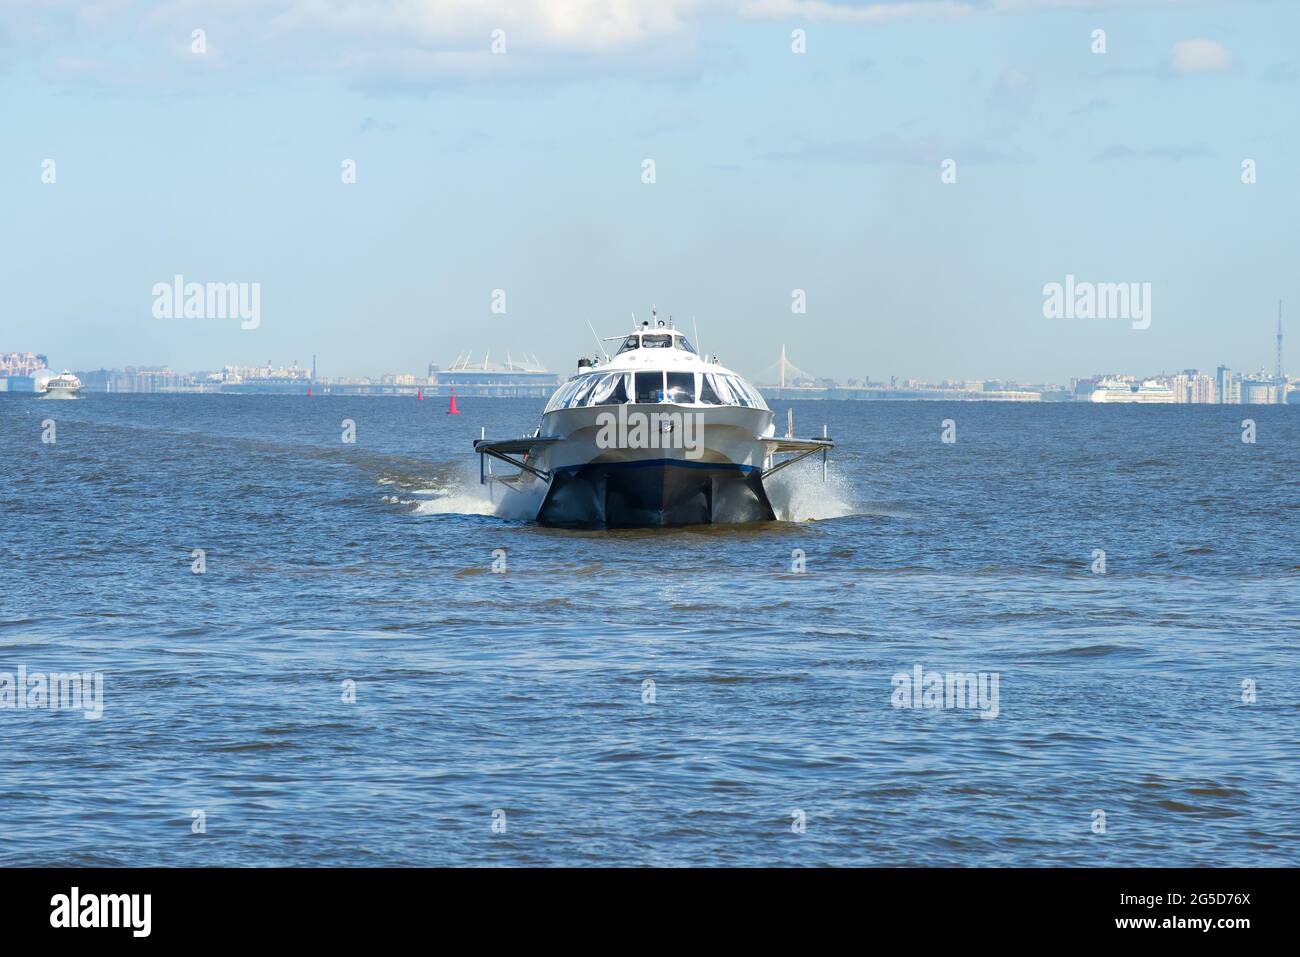 SAINT-PETERSBURG, RUSSIA - MAY 30, 2017: The hydrofoil ship 'Meteor' in the Gulf of Finland water area Stock Photo